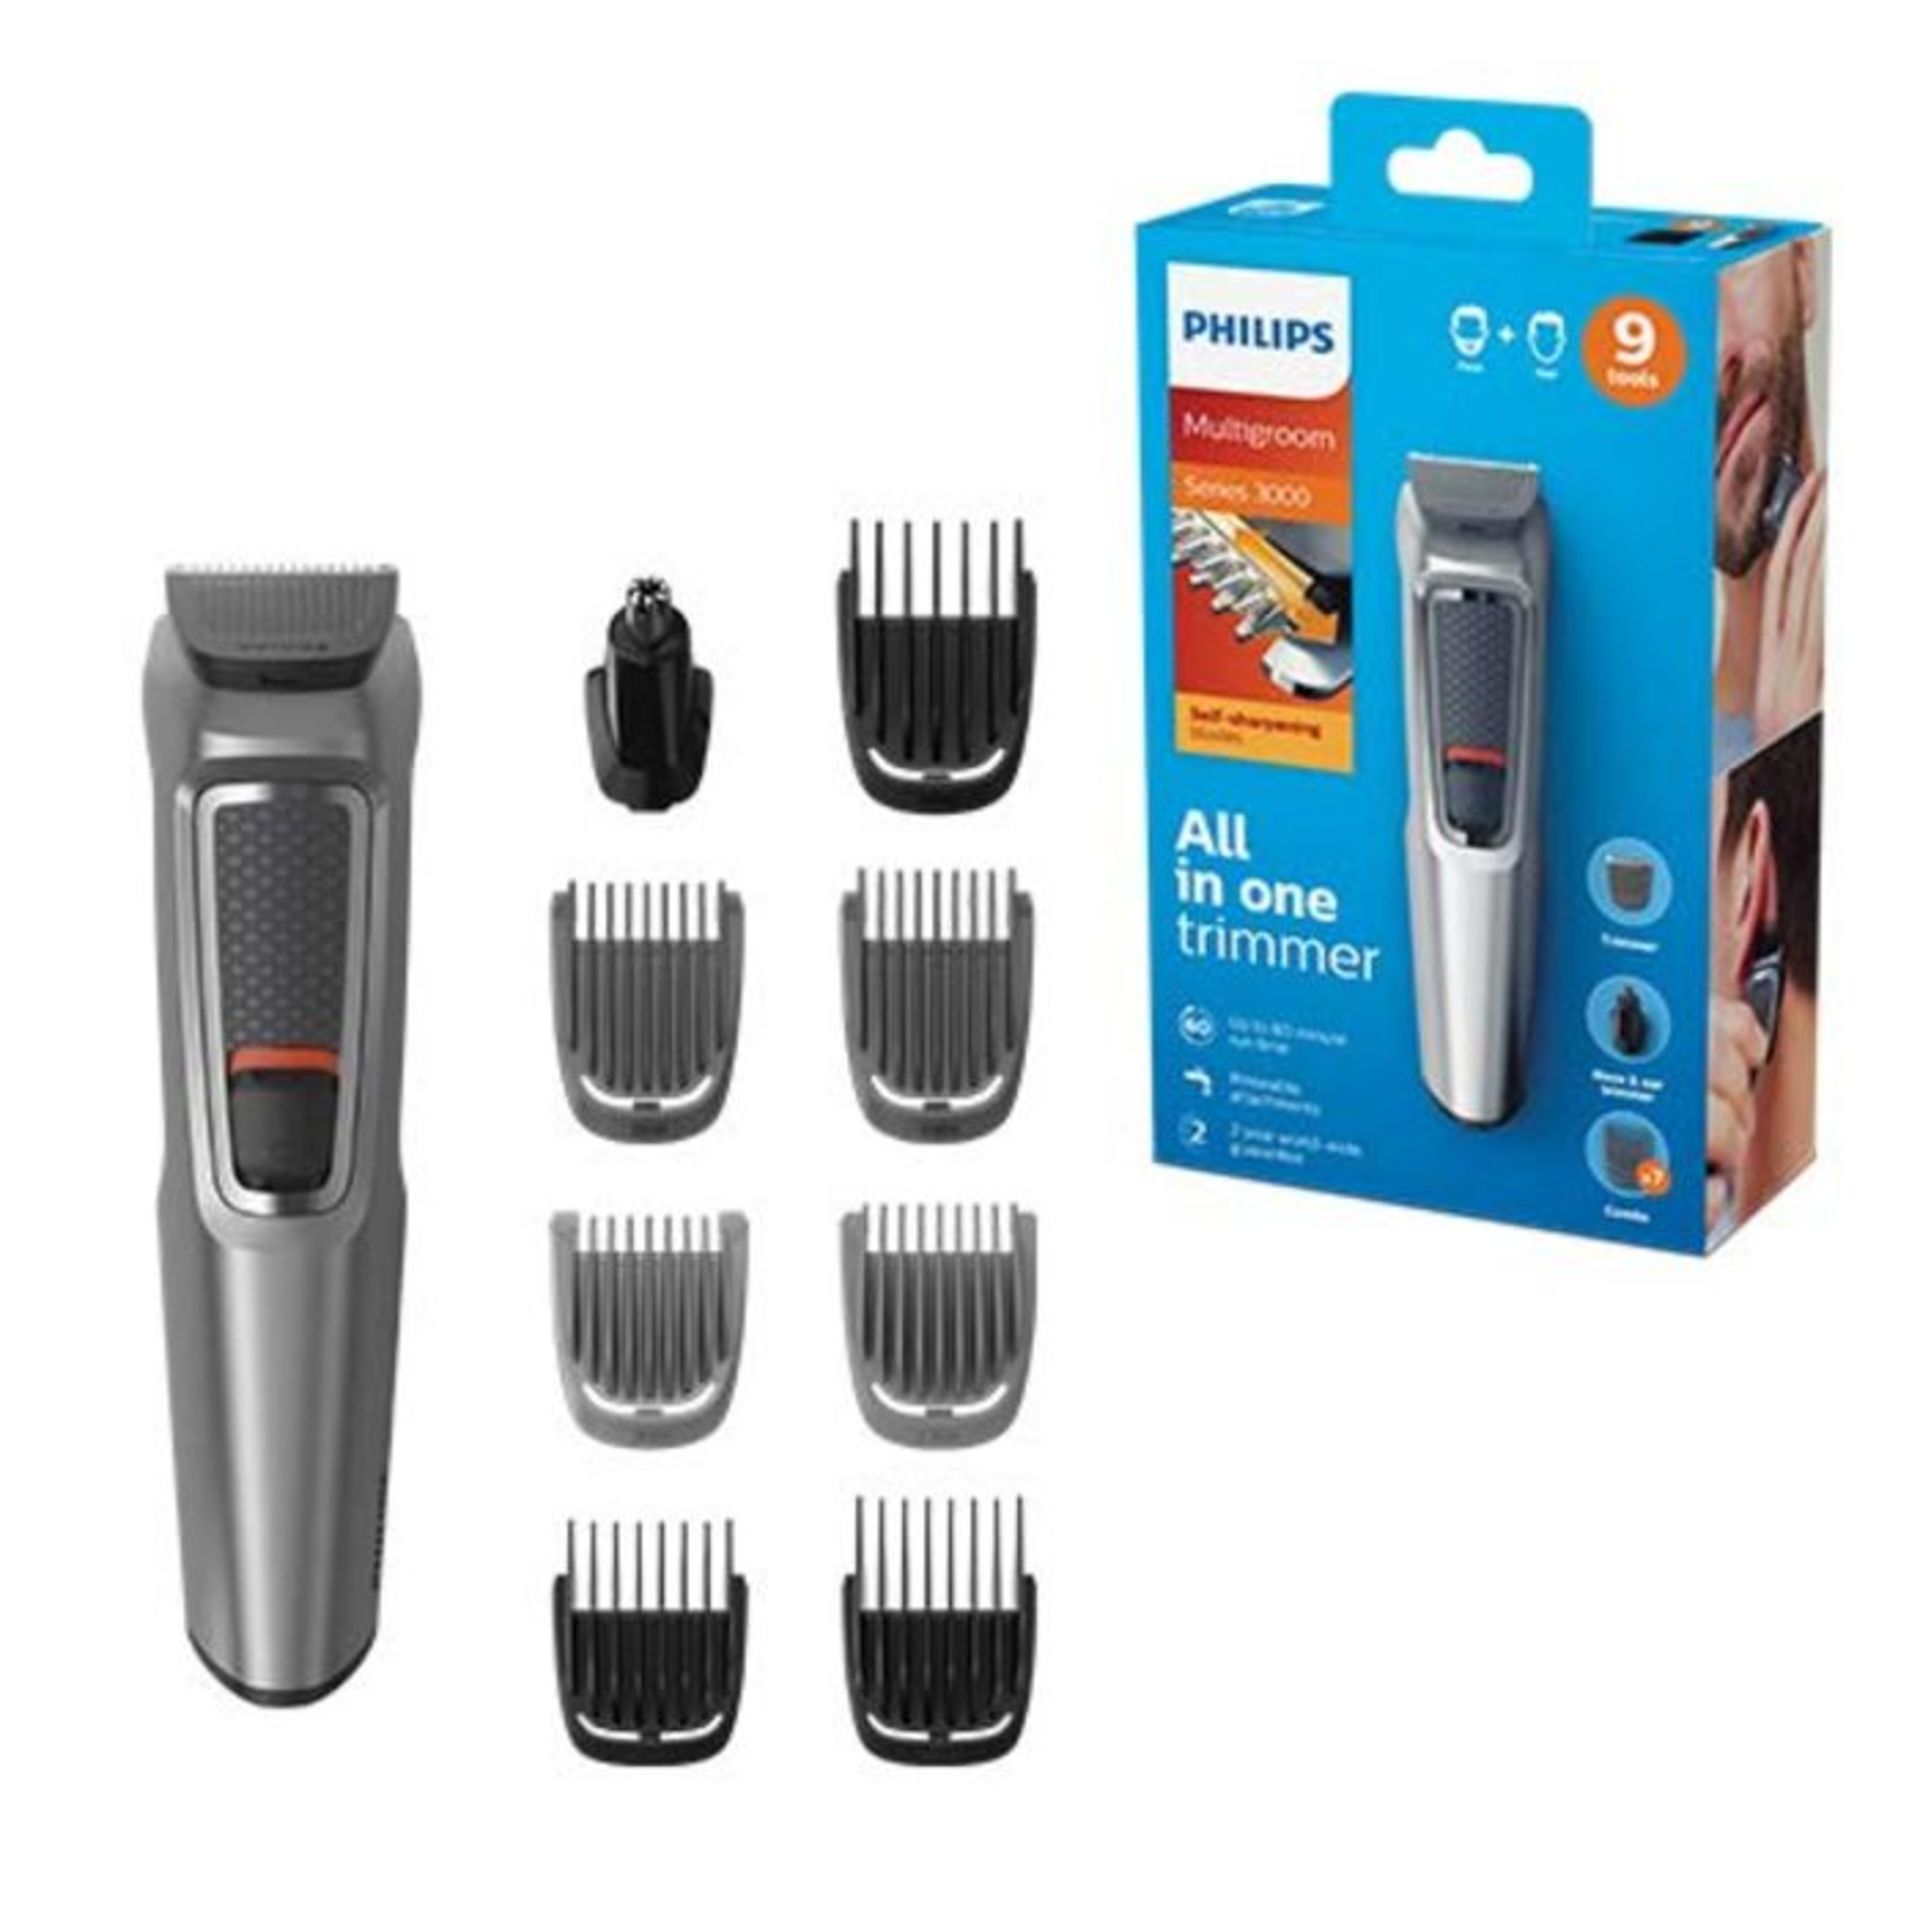 Philips 9-in-1 All-In-One Trimmer, Series 3000 Grooming Kit for Beard & Hair with 9 At